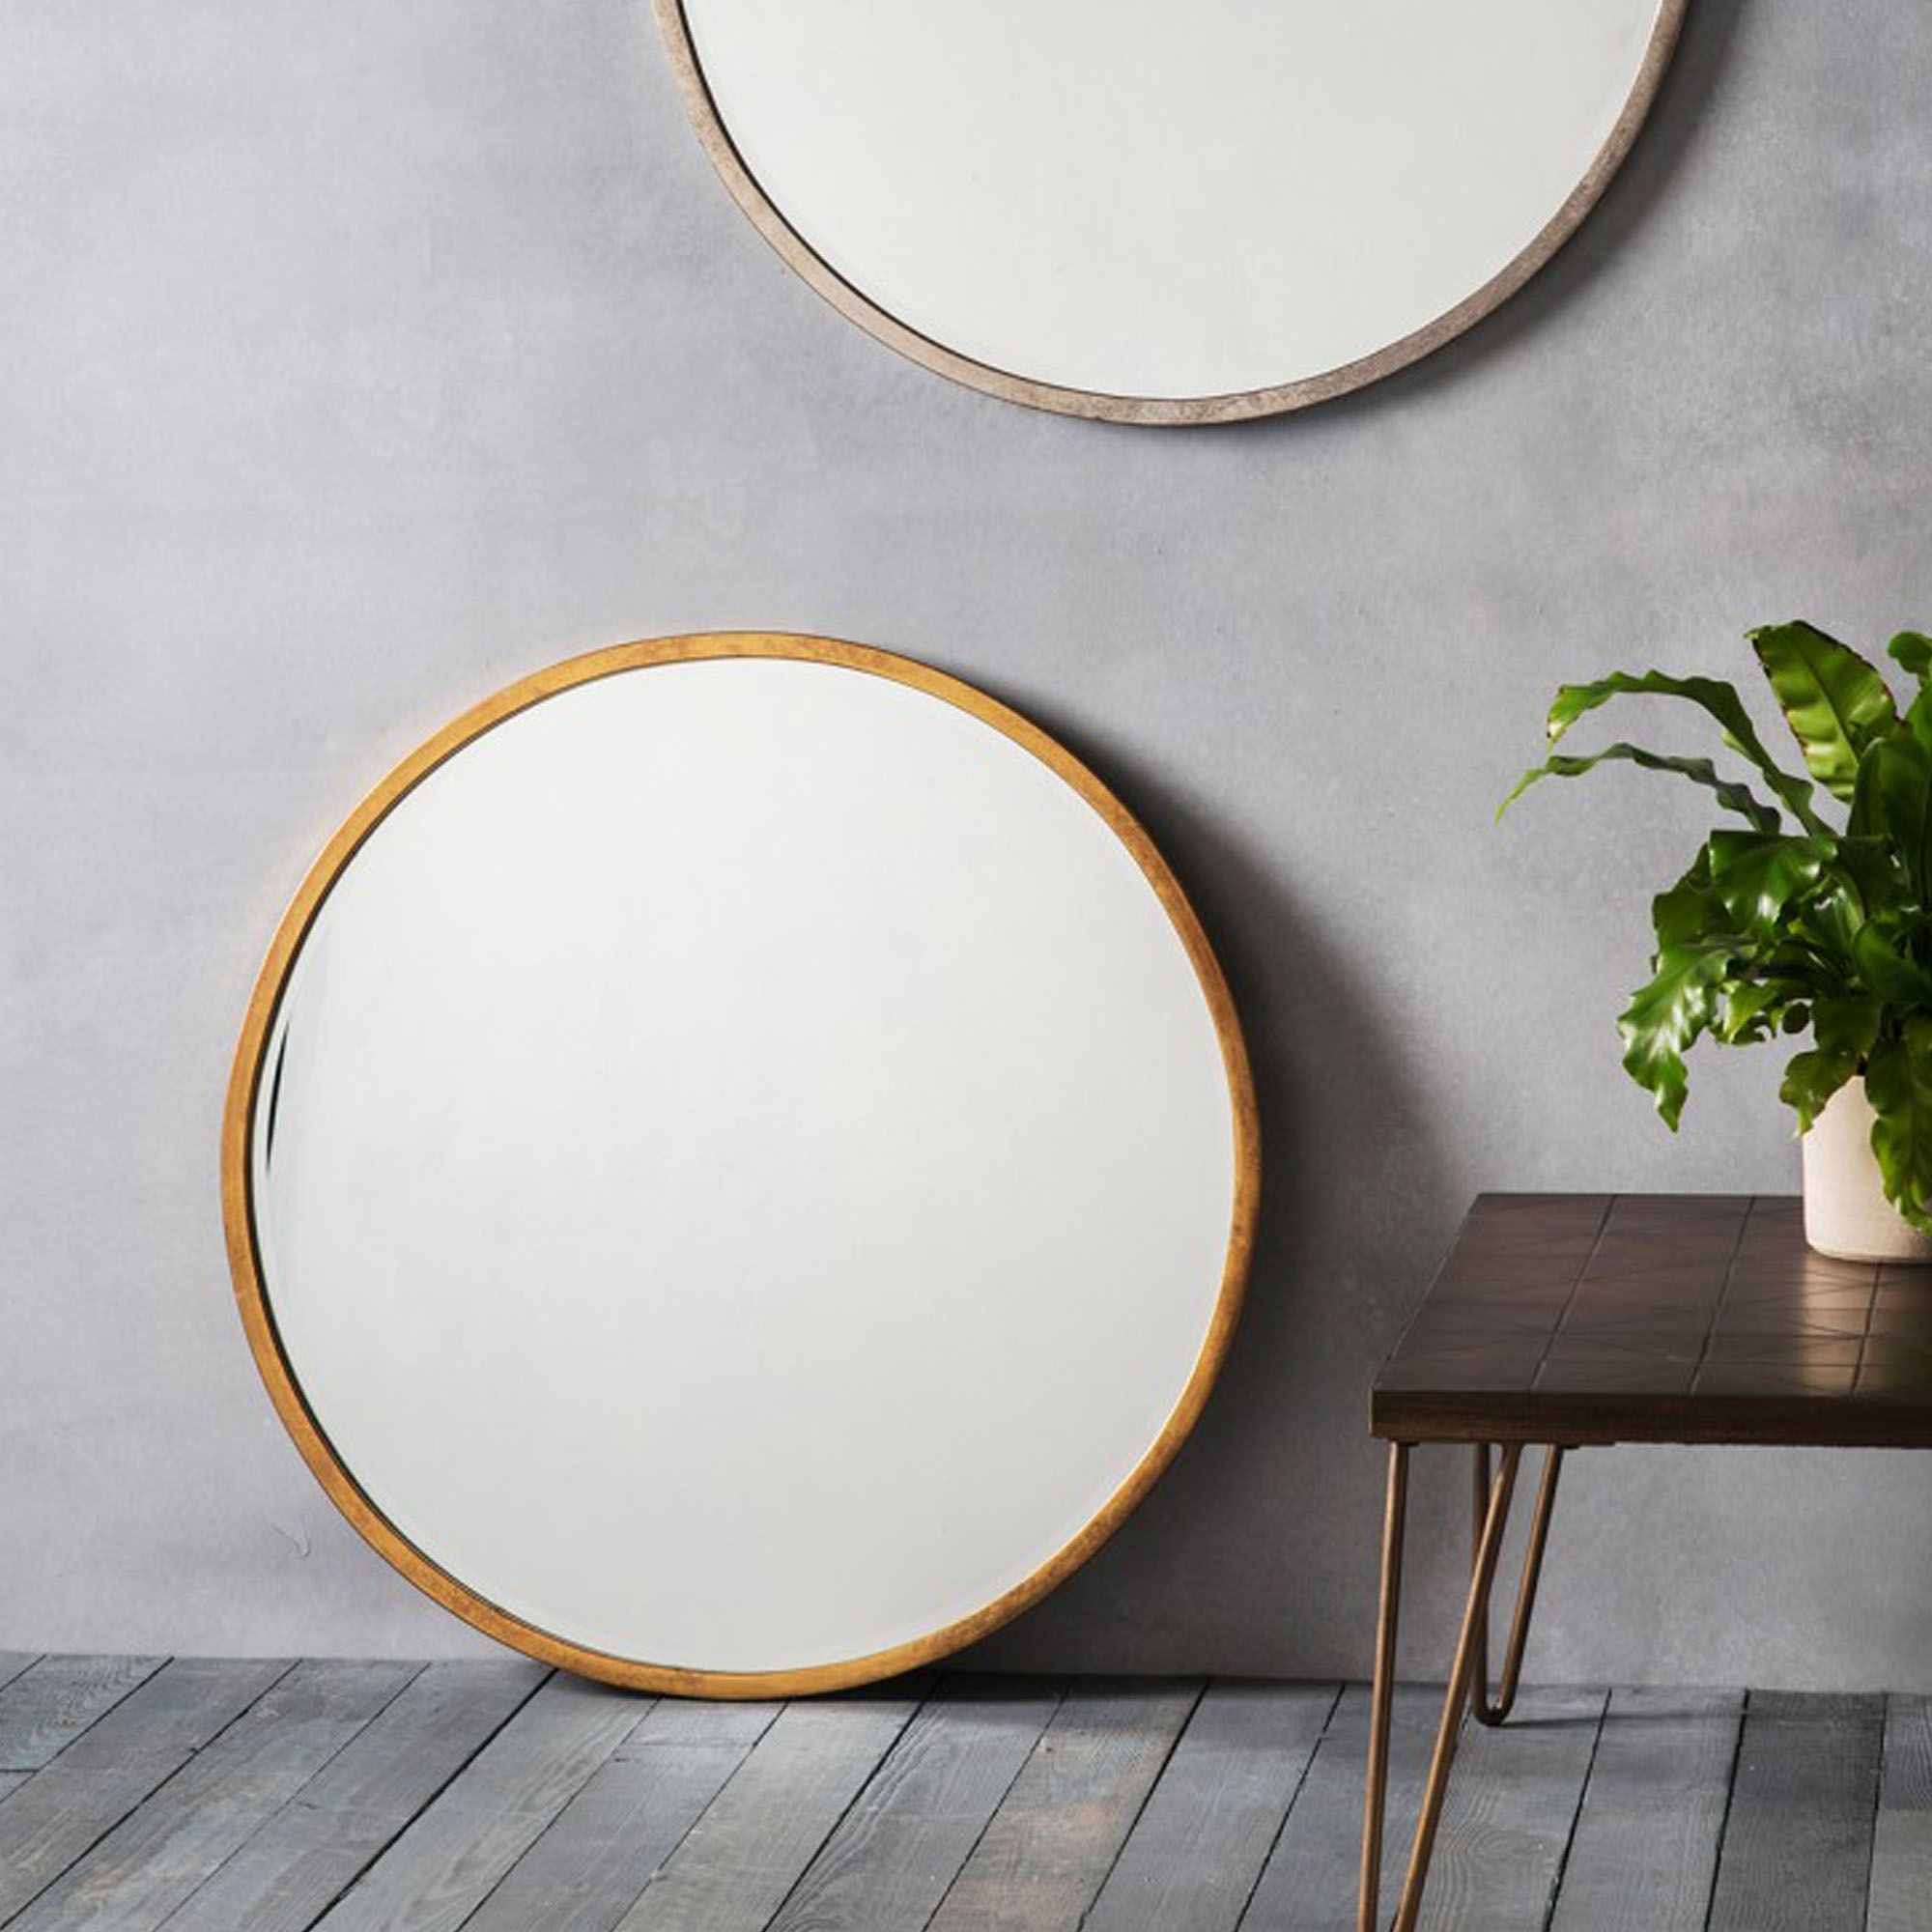 Higgins Antique Gold Round Wall Mirror | Wall Mirrors | Homesdirect365 Throughout Shiny Black Round Wall Mirrors (View 2 of 15)